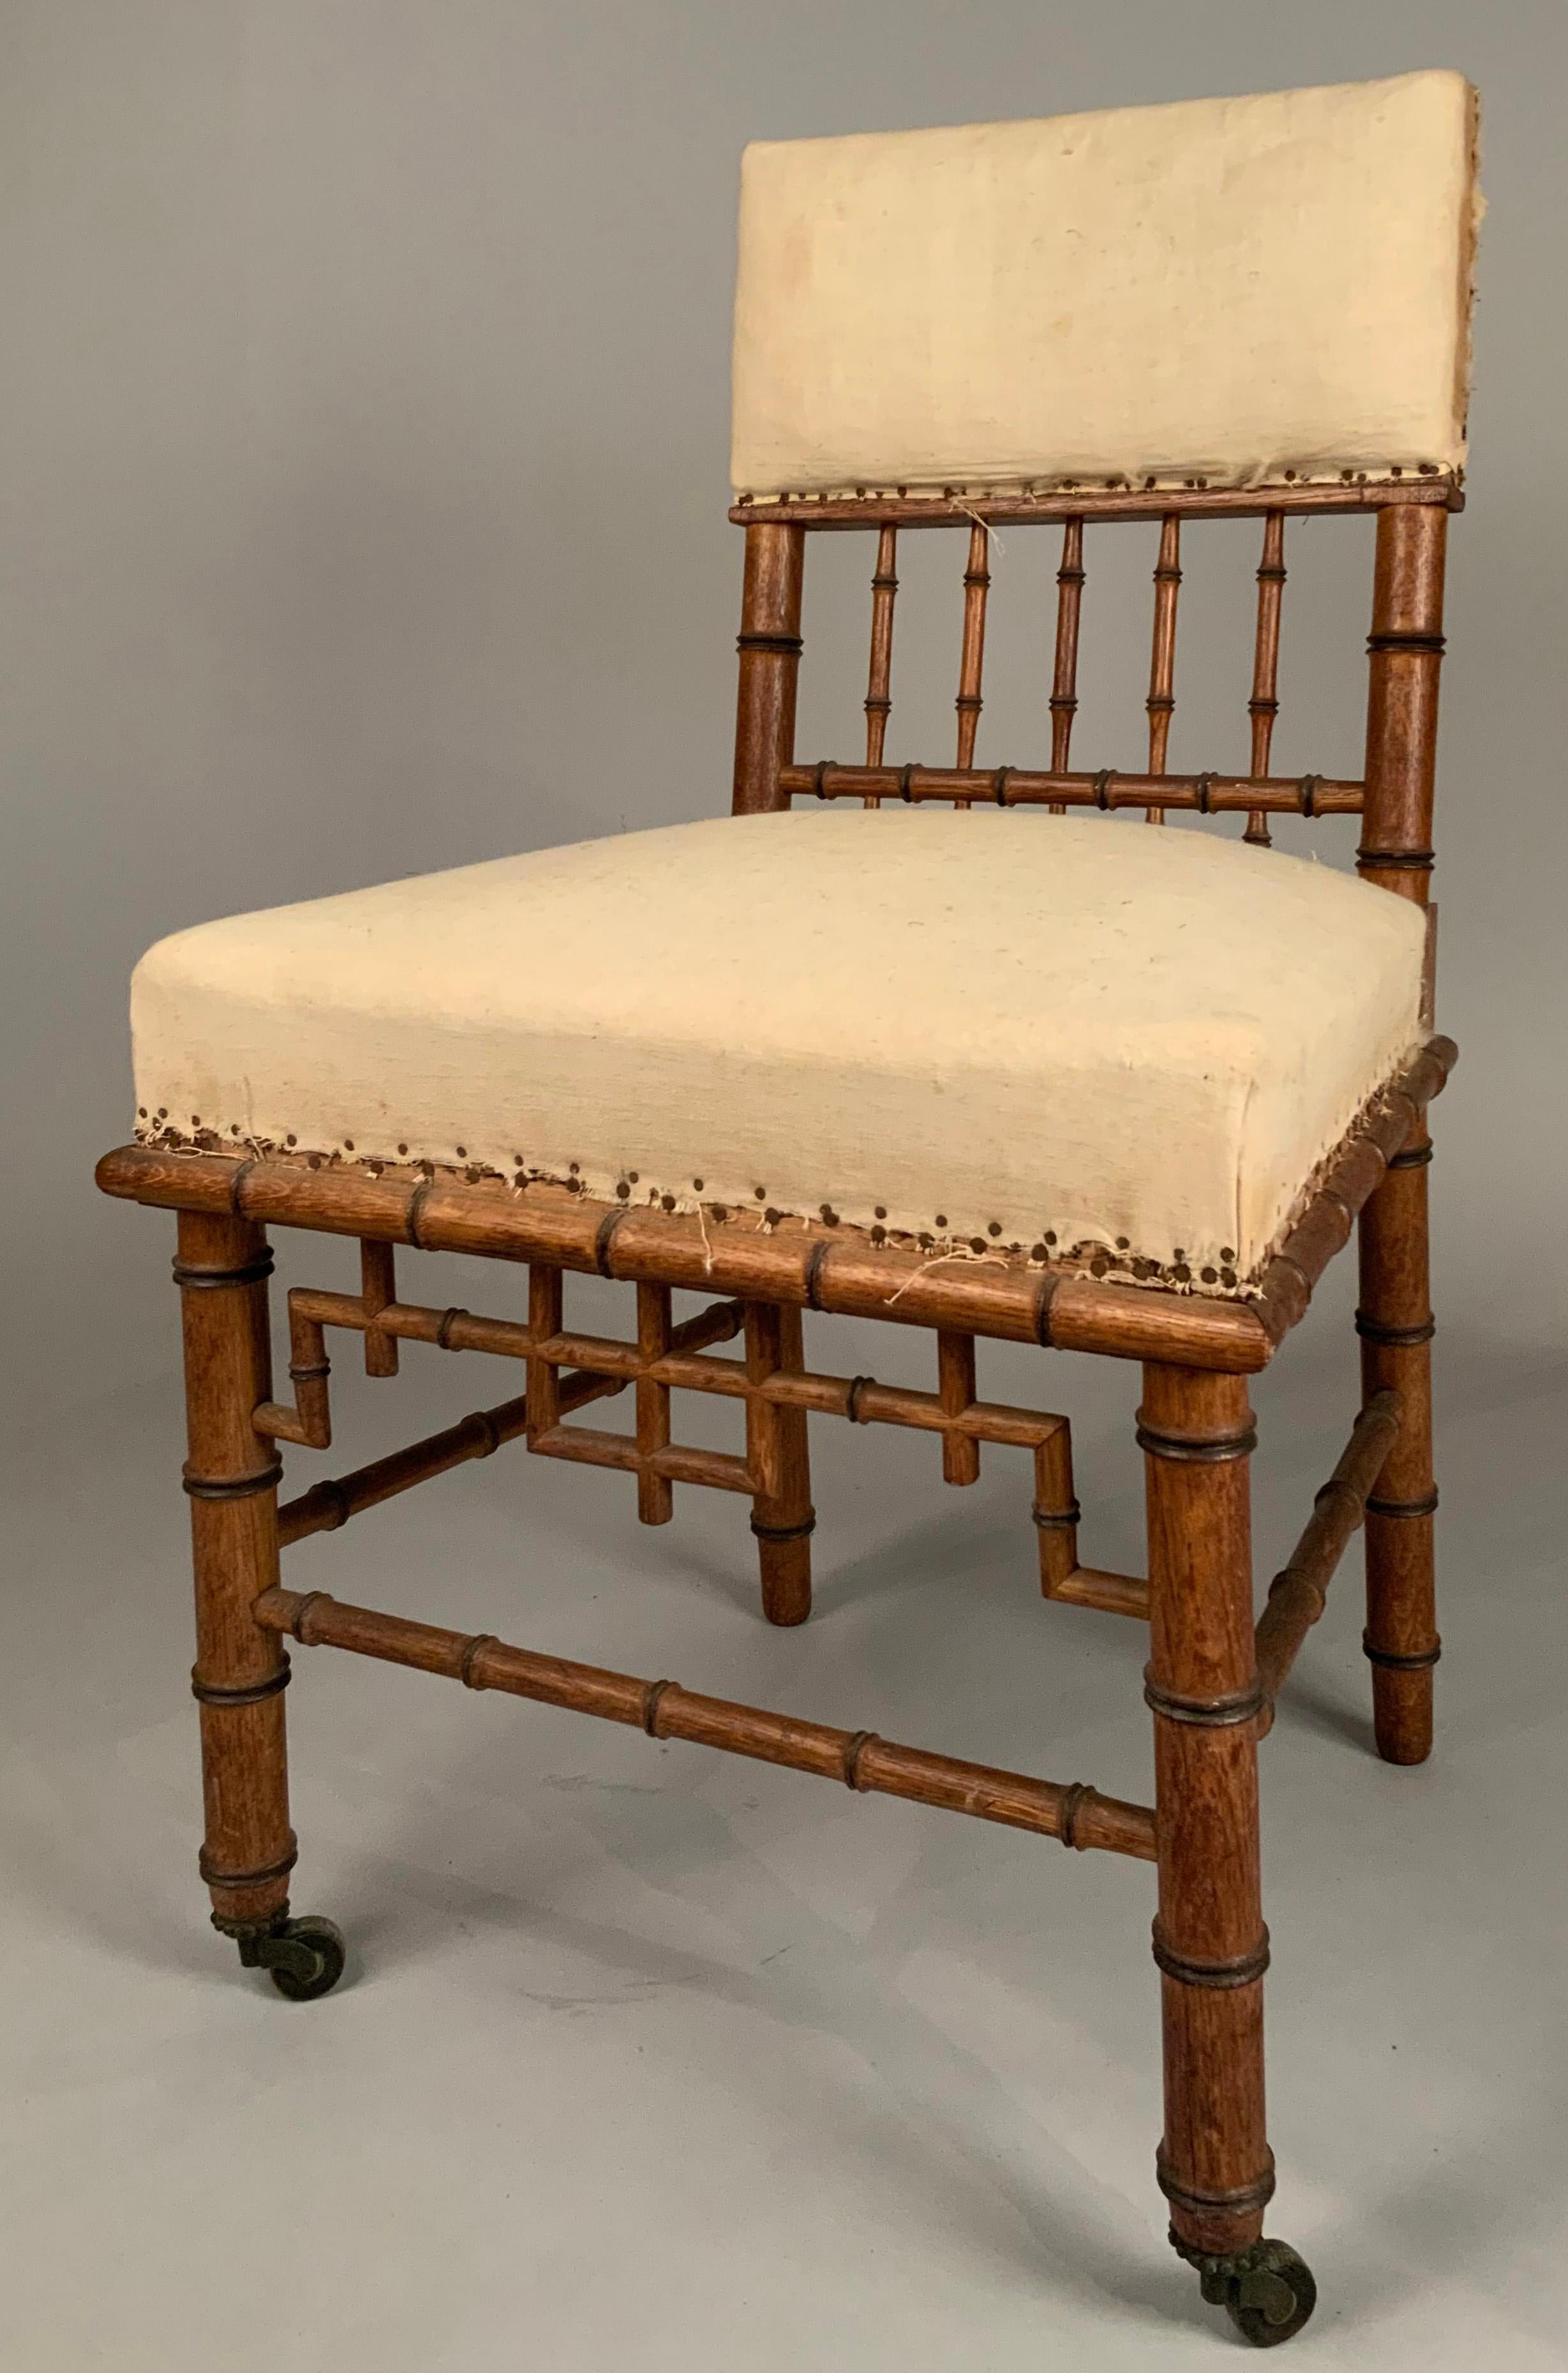 A very charming antique 19th century English side chair, in bamboo form, with chippendale details. the chair has an upholstered and vertical rail back, a bamboo ledge below the seat and casters on the front legs. beautiful scale and details. the